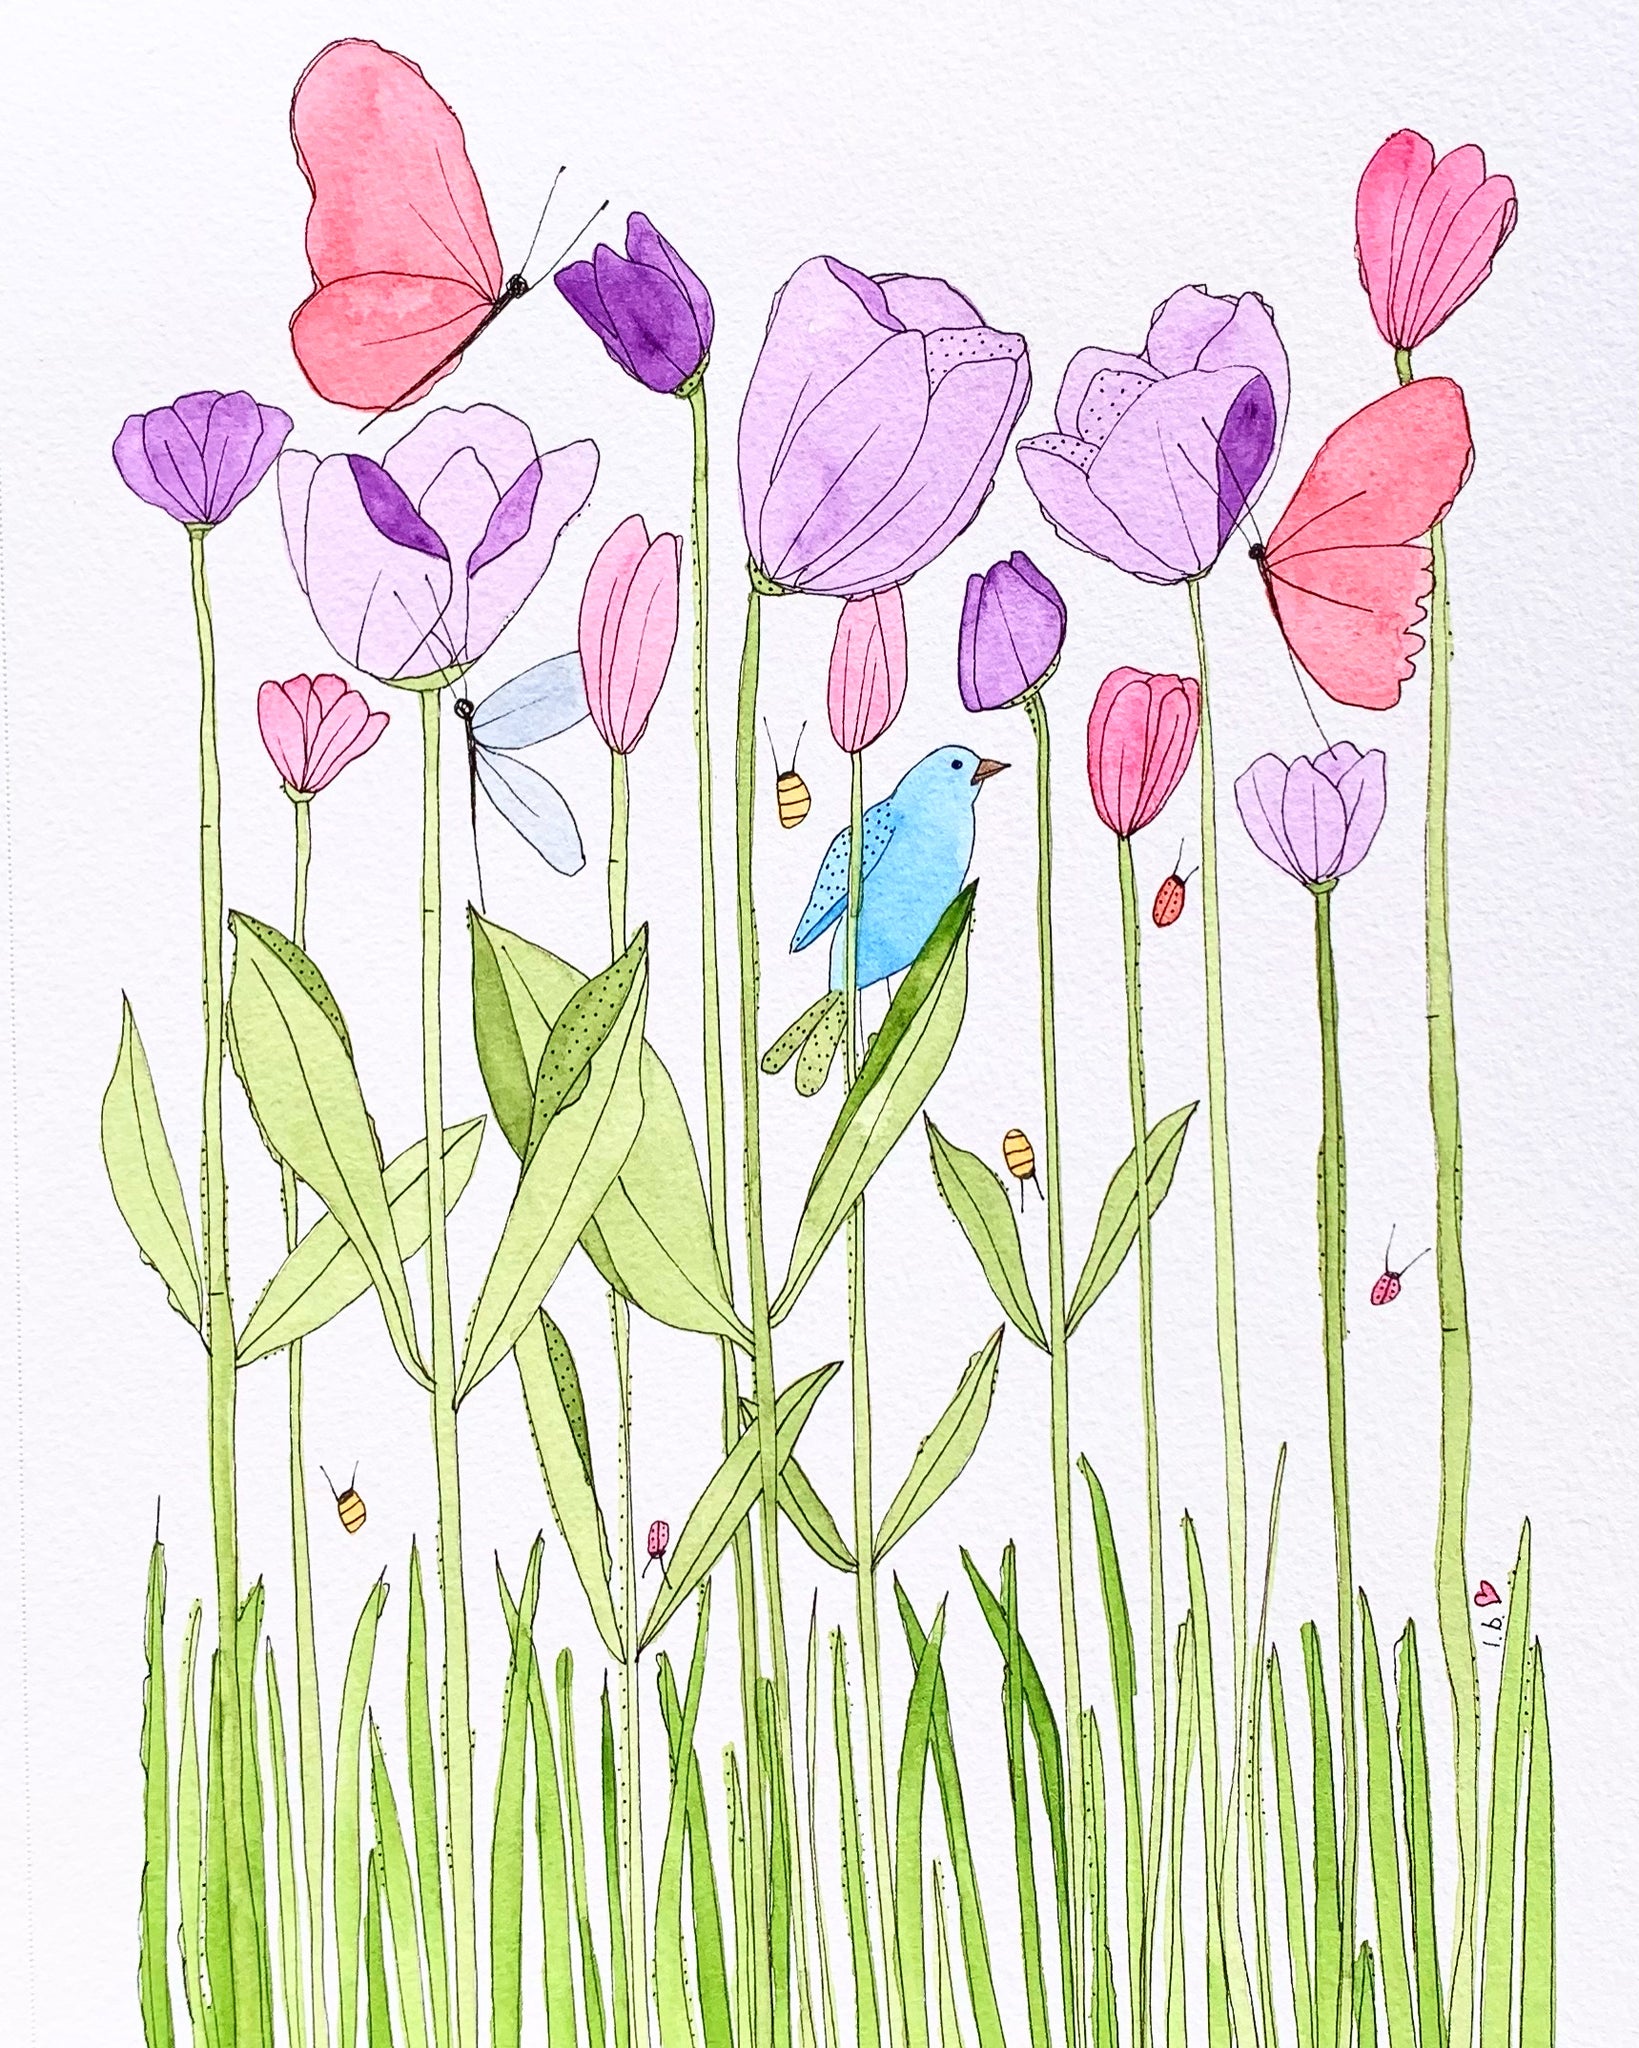 Greeting card "Waiting to see Tulips"